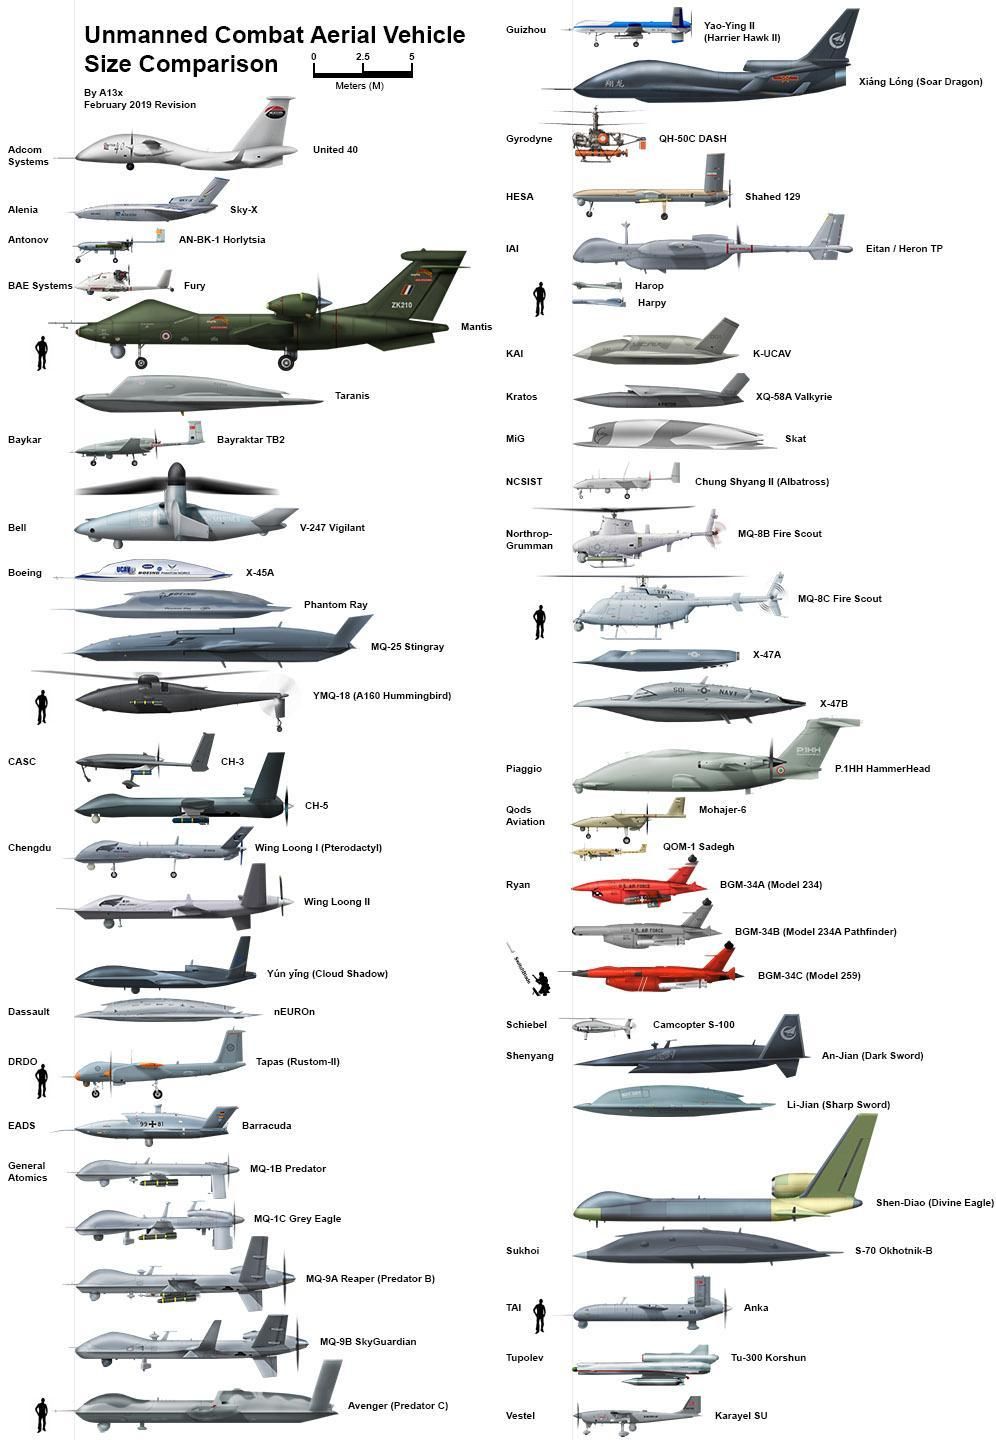 Infographic | Unmanned Combat Aerial Vehicle Size Comparison